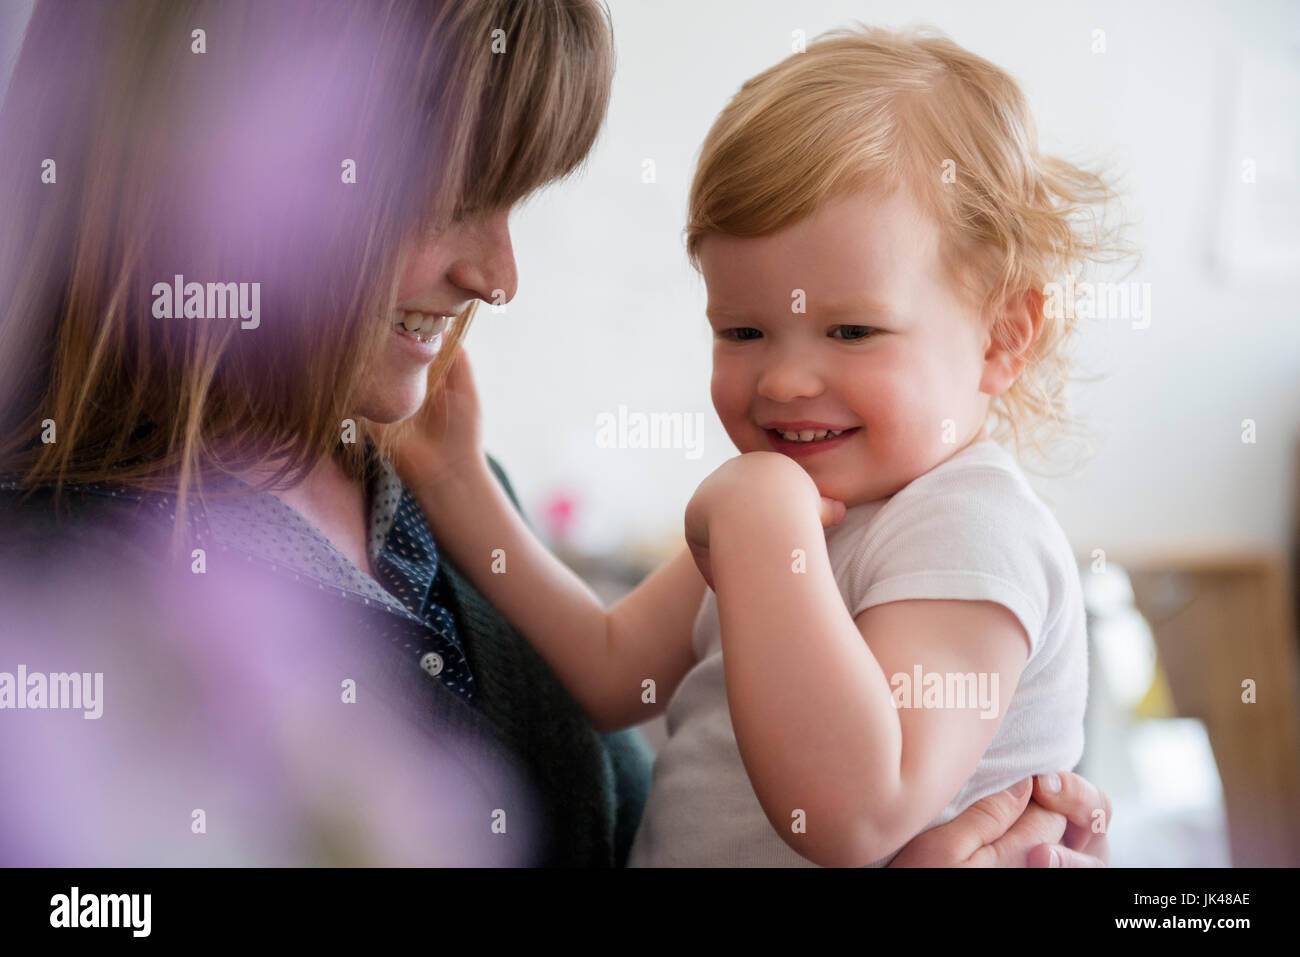 Caucasian mother holding daughter laughing Banque D'Images